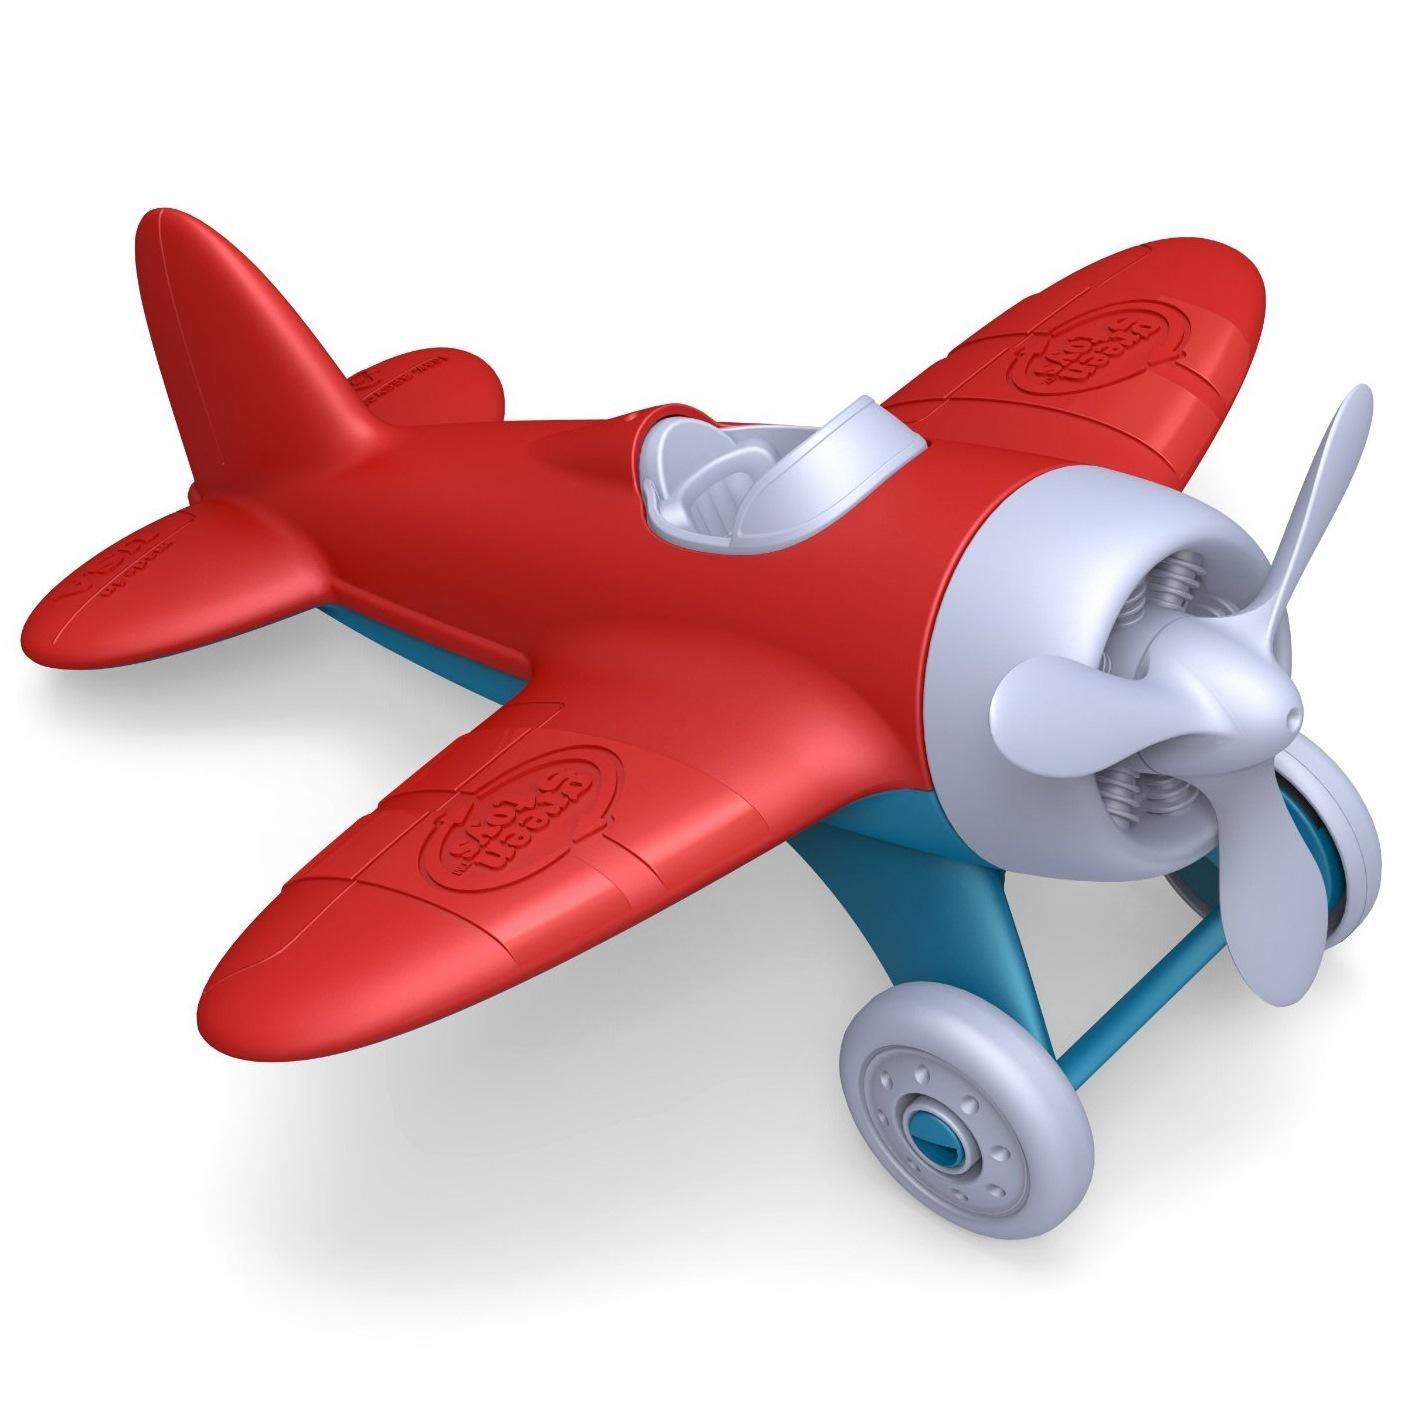 Free Toy Plane, Download Free Clip Art, Free Clip Art on